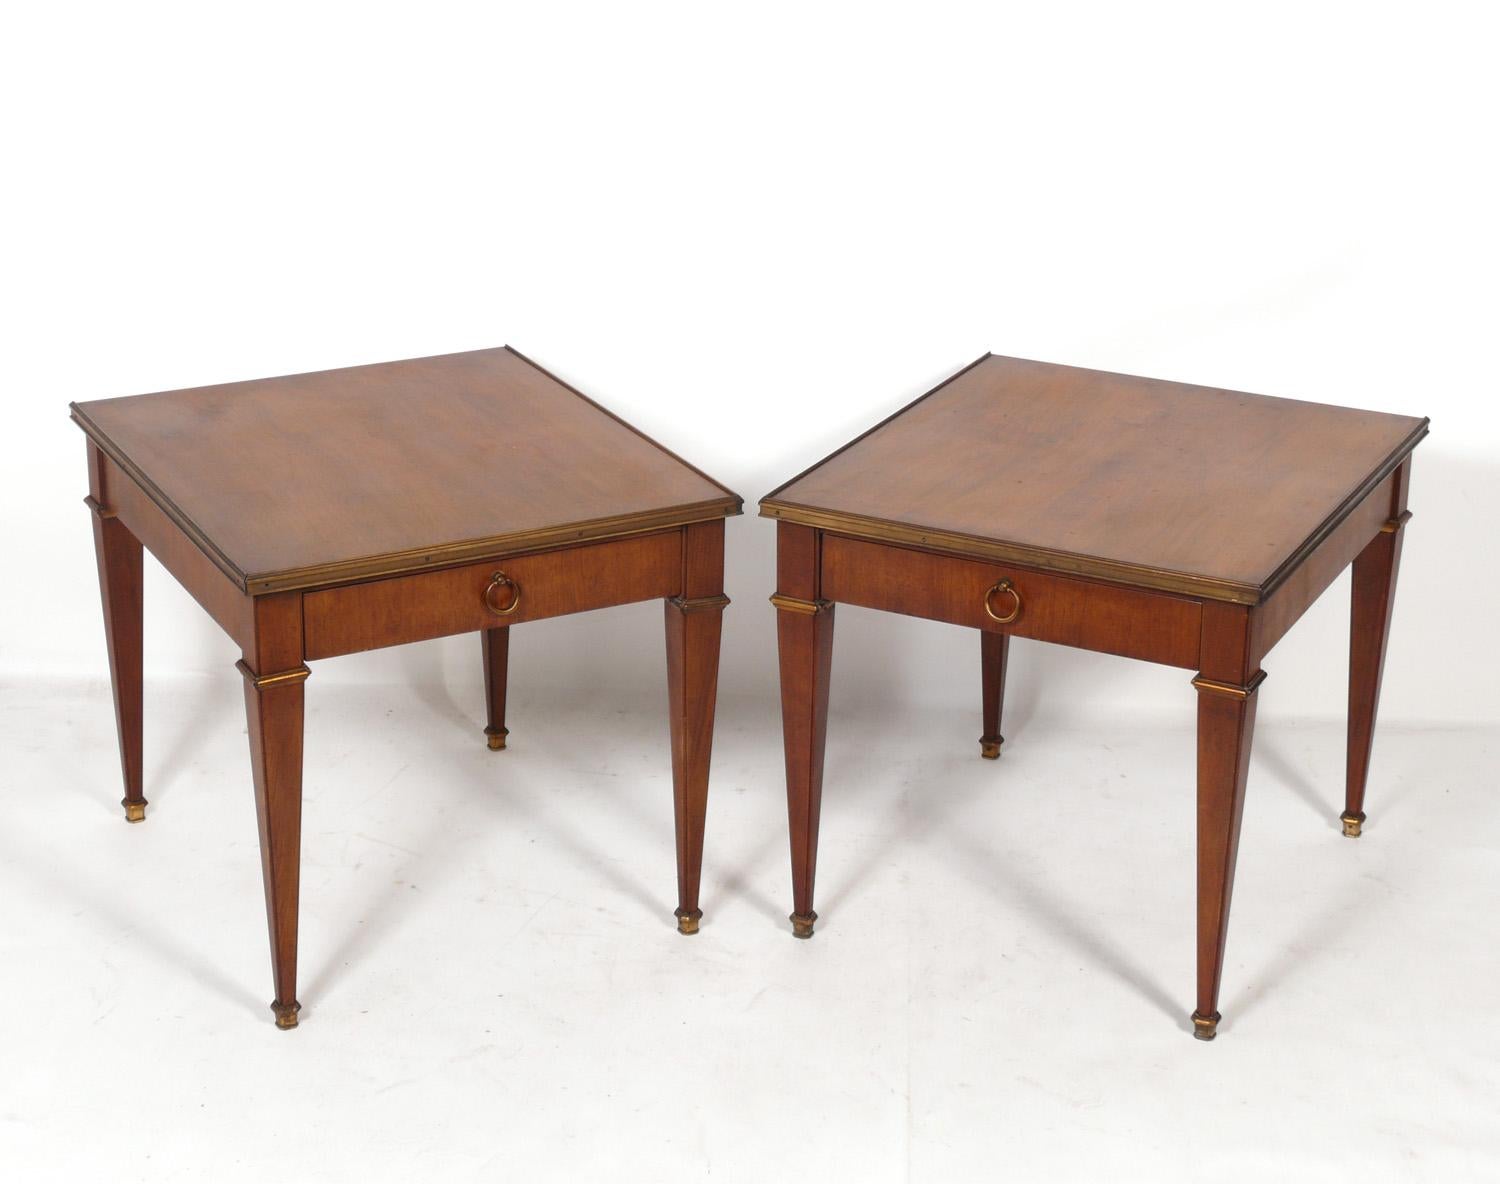 Pair of baker neoclassical side tables or night stands, American, circa 1960s. Elegant brass hardware.